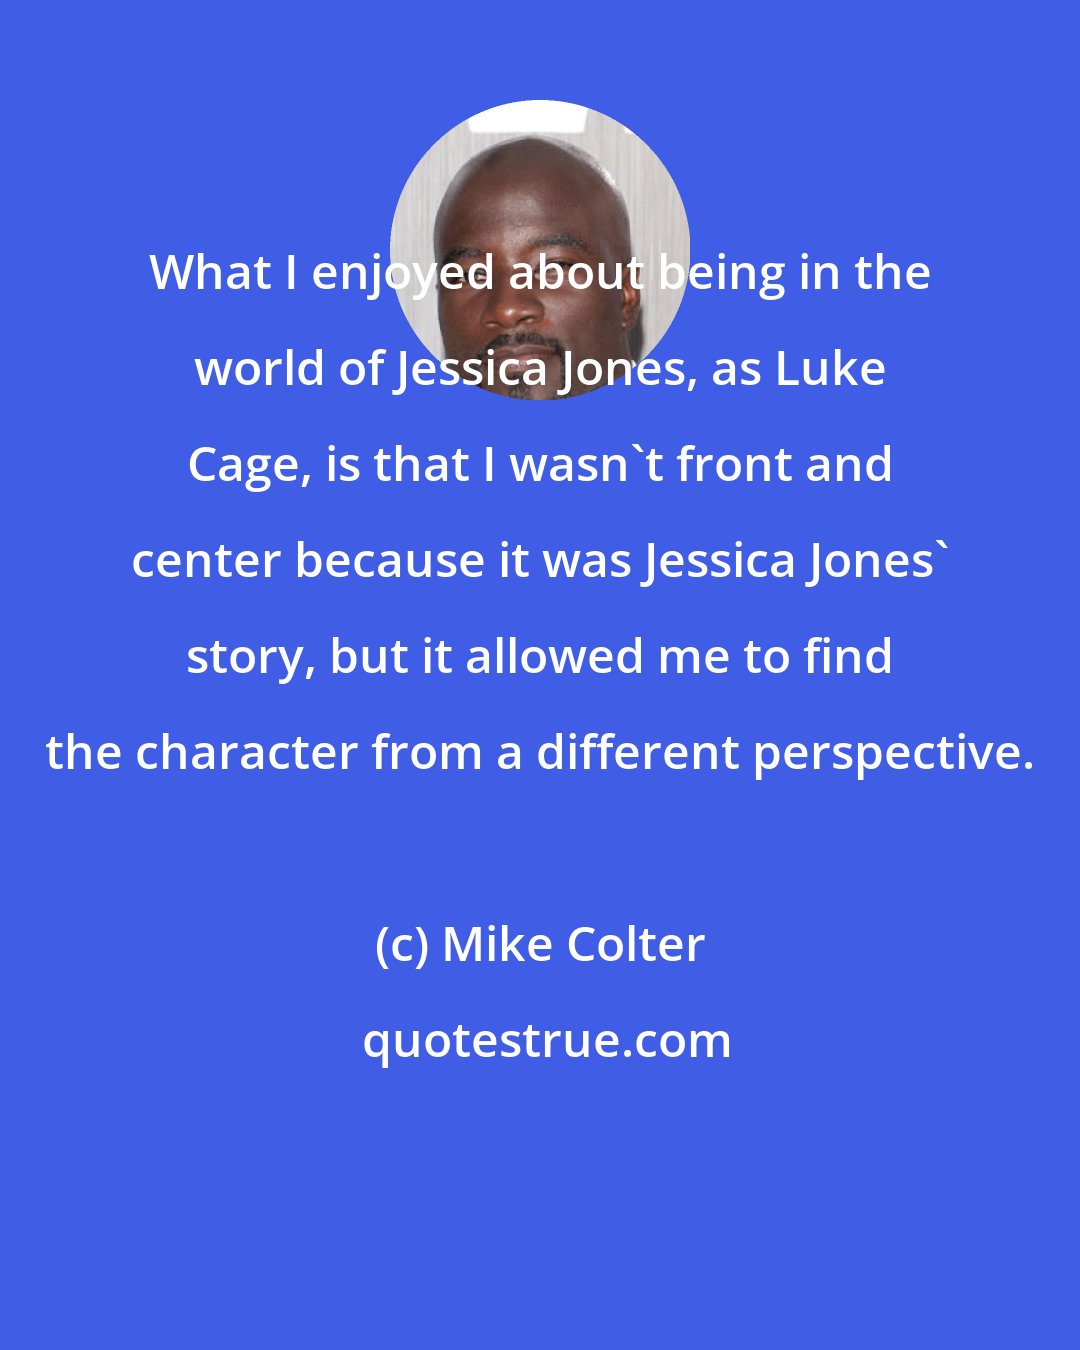 Mike Colter: What I enjoyed about being in the world of Jessica Jones, as Luke Cage, is that I wasn't front and center because it was Jessica Jones' story, but it allowed me to find the character from a different perspective.